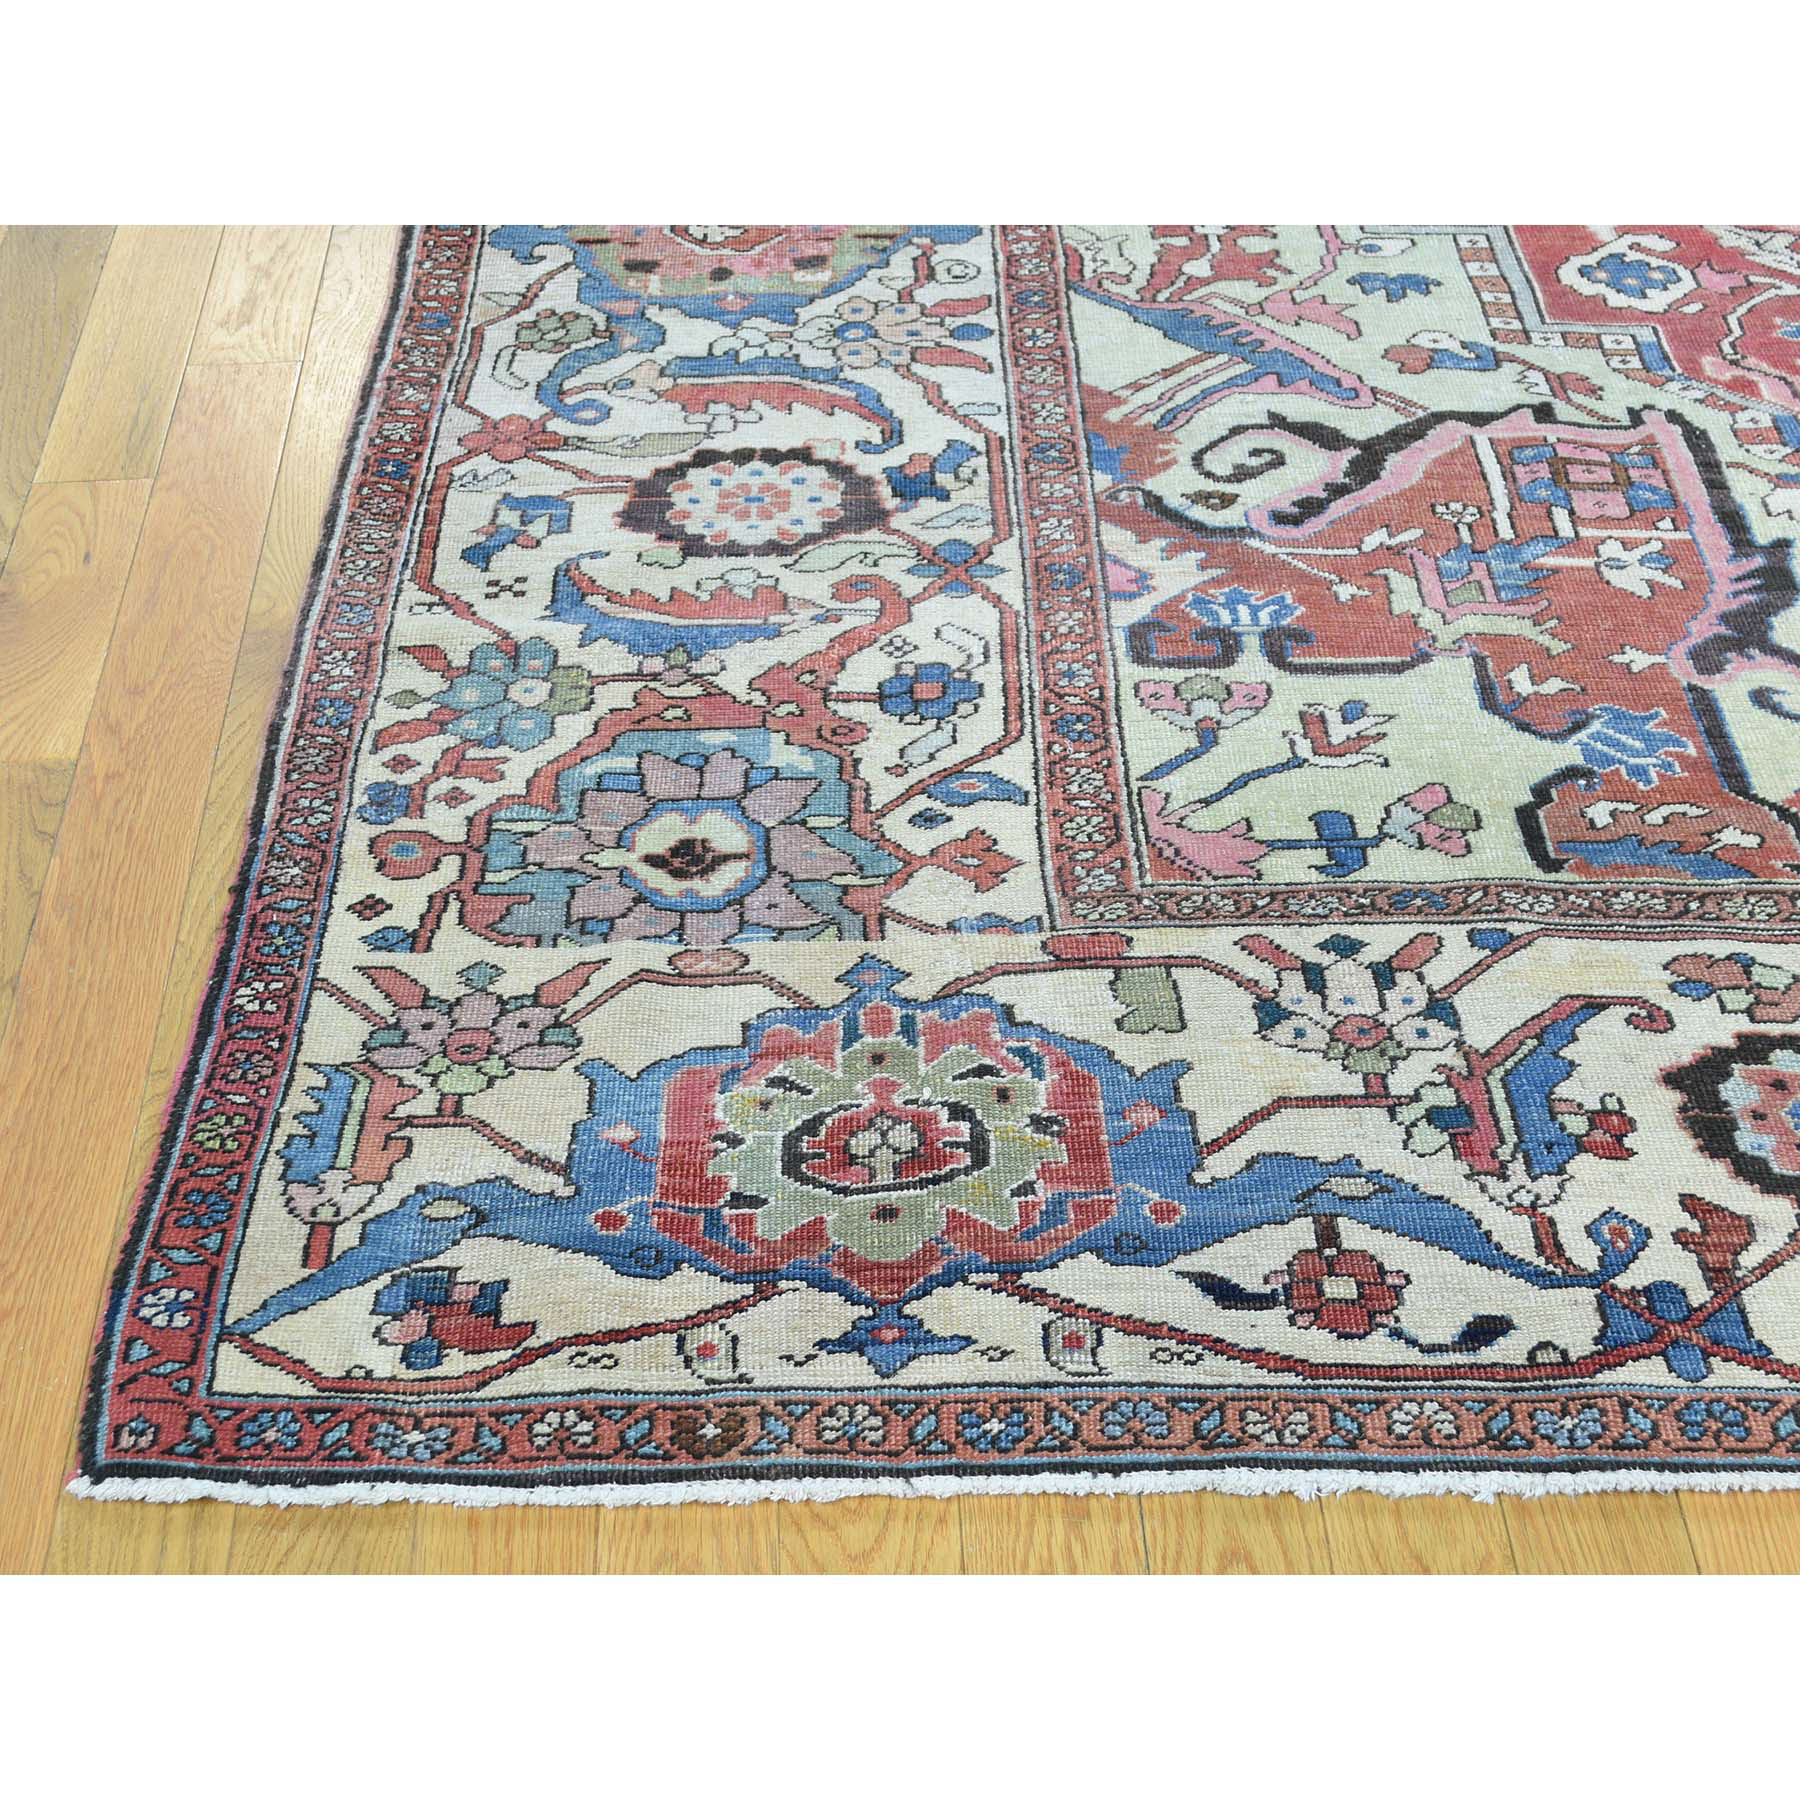 10-1 x14-1  Hand-Knotted Antique Persian Serapi Good Cond Oriental Rug 